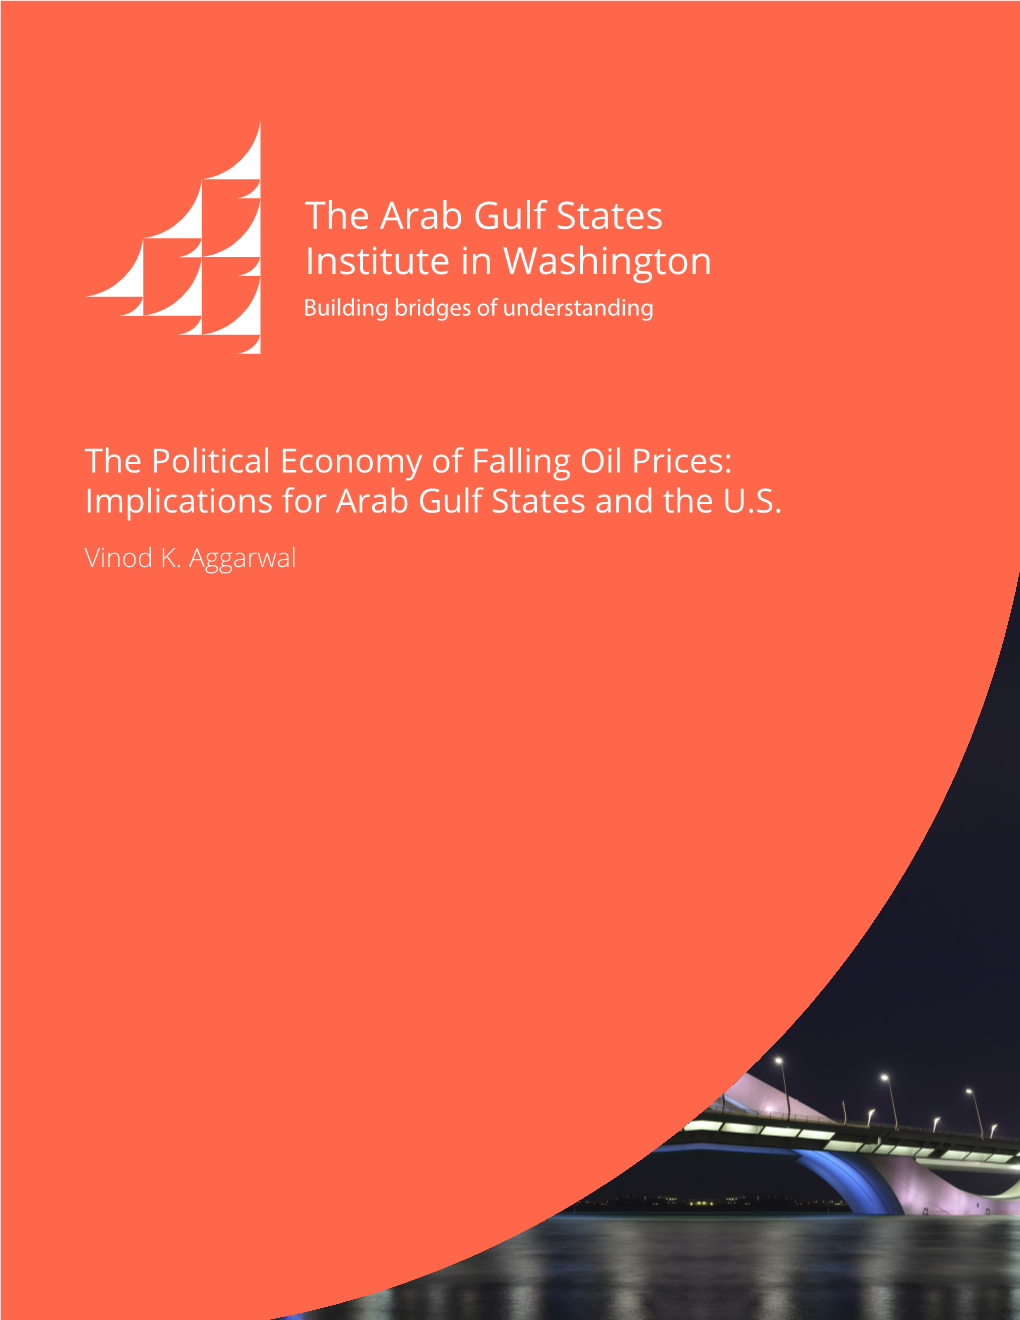 The Political Economy of Falling Oil Prices: Implications for Arab Gulf States and the U.S